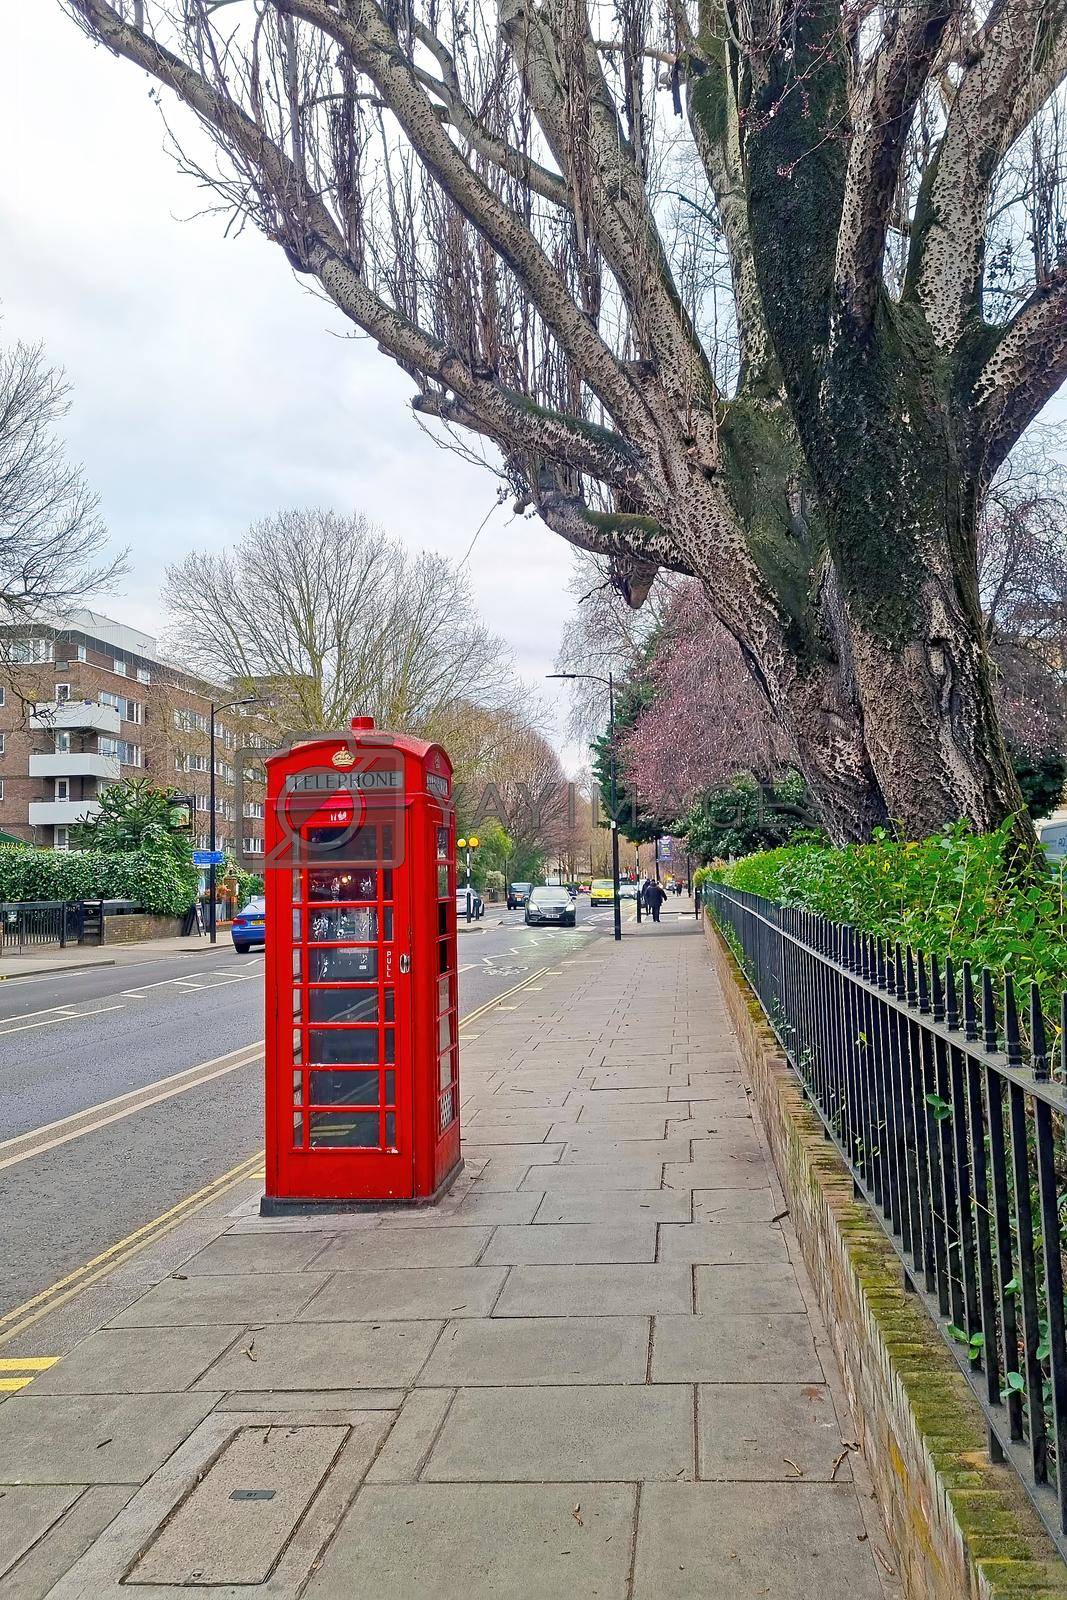 London, United Kingdom, February 9, 2022: the famous red telephone booth on the streets of London